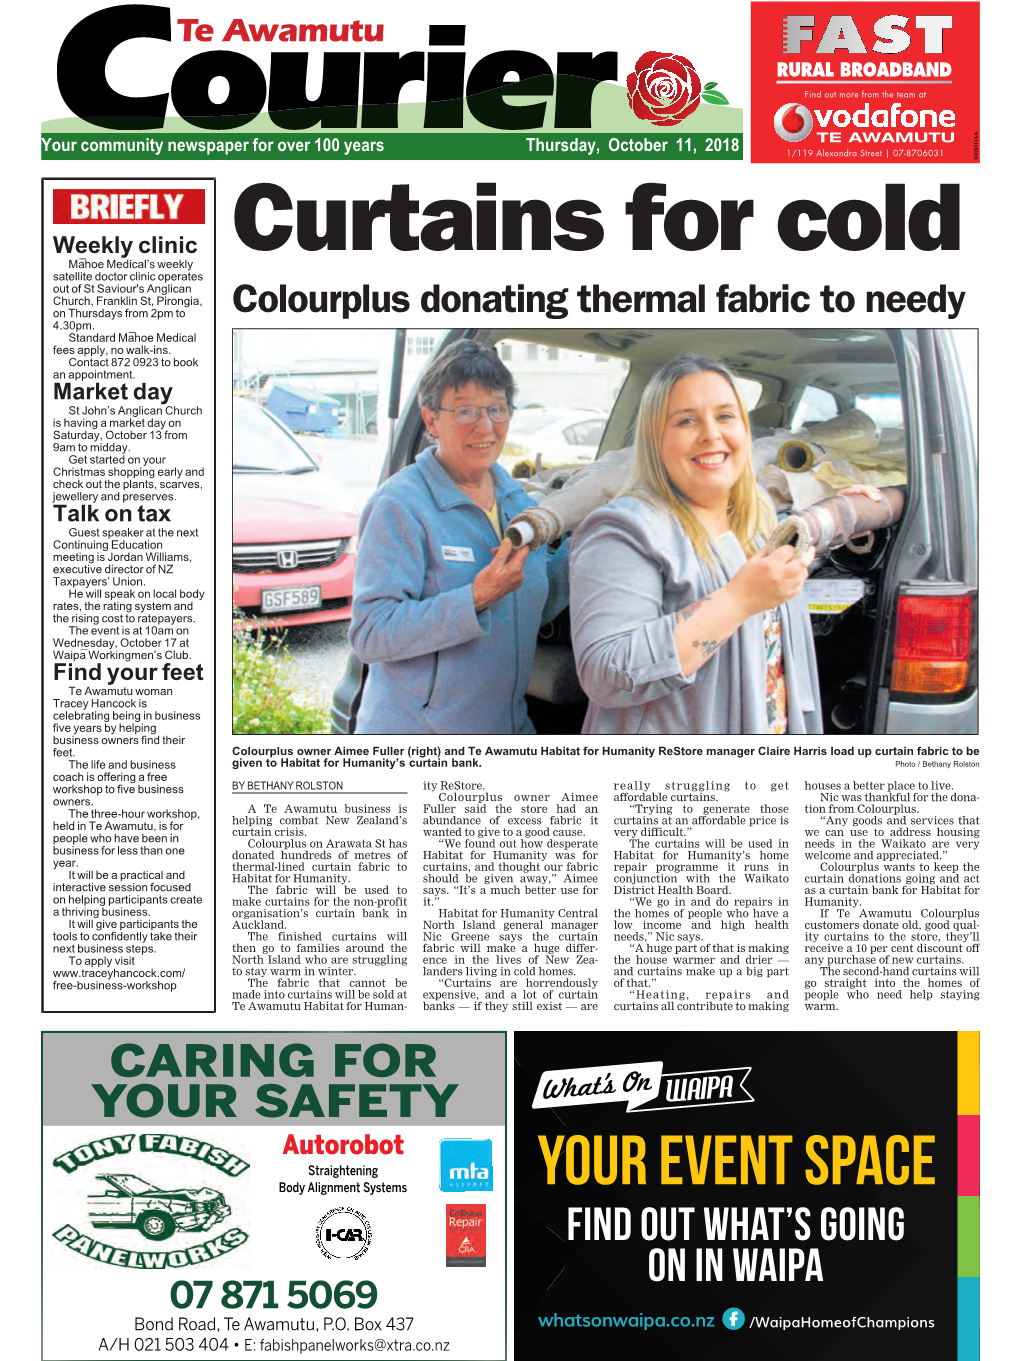 Te Awamutu Courier Thursday, October 11, 2018 Shining Light on Child Marriage